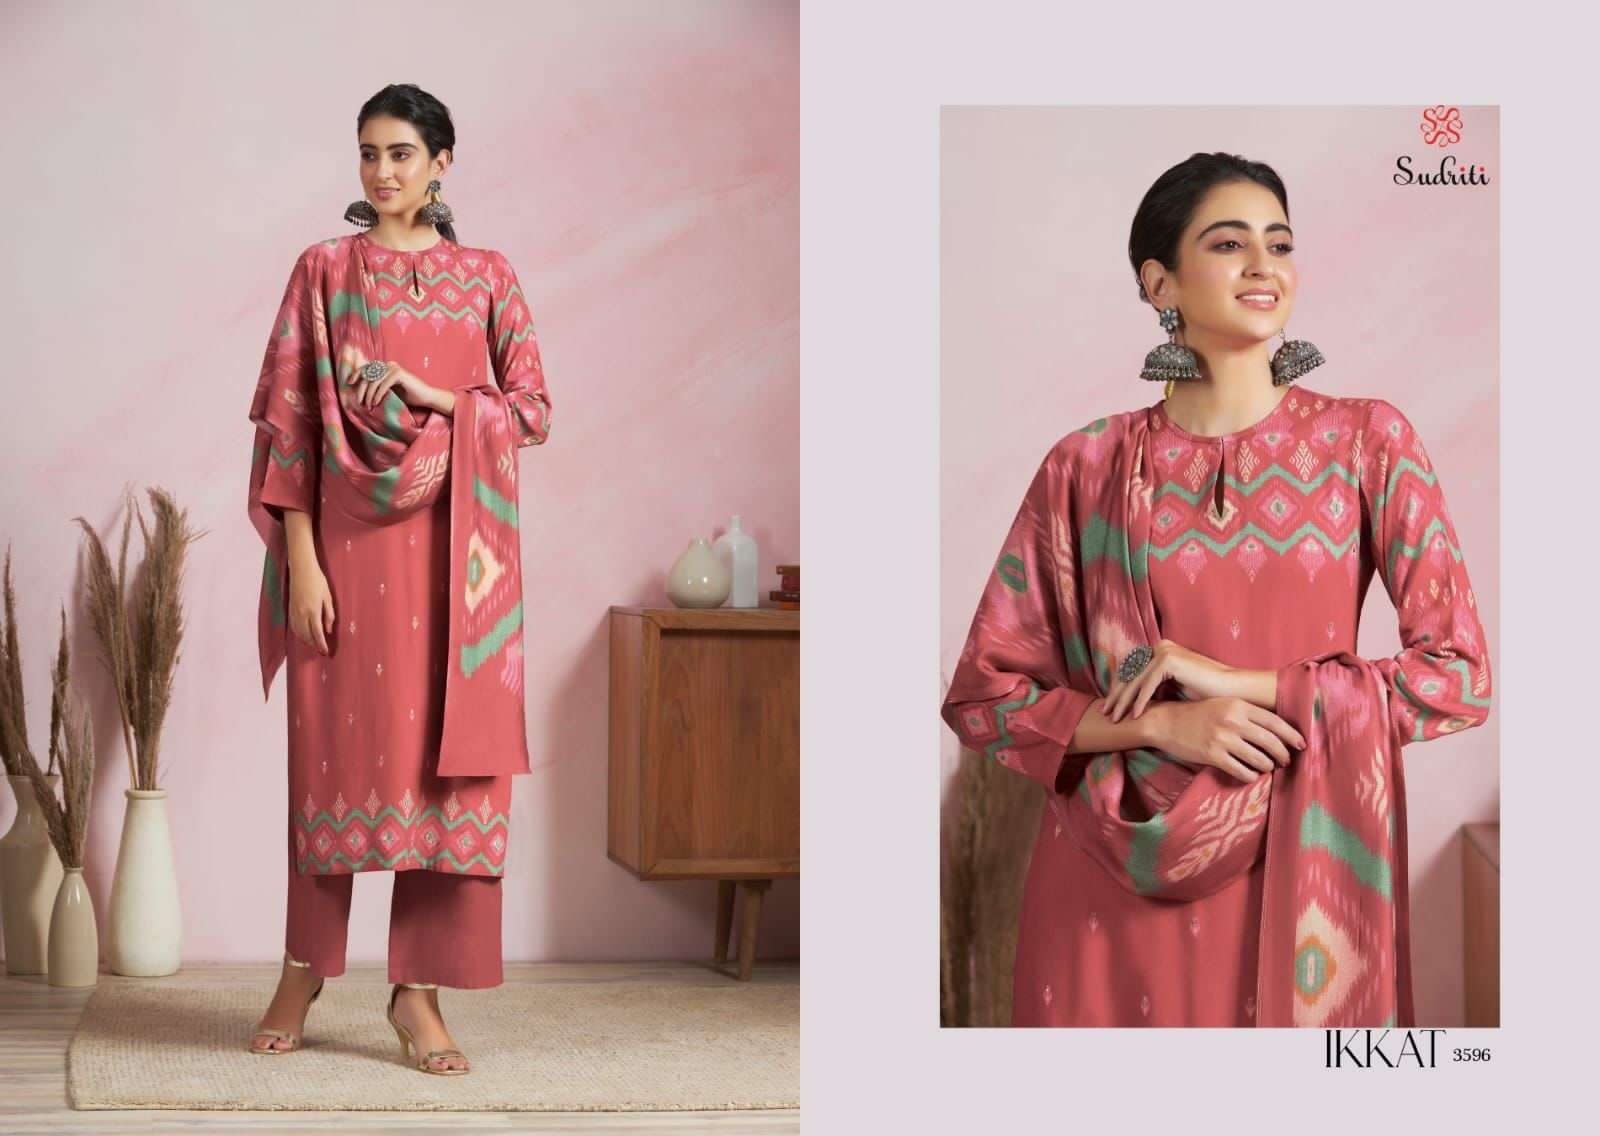 IKKAT BY SUDRITI BEAUTIFUL SUITS COLORFUL STYLISH FANCY CASUAL WEAR & ETHNIC WEAR PURE PASHMINA PRINT DRESSES AT WHOLESALE PRICE